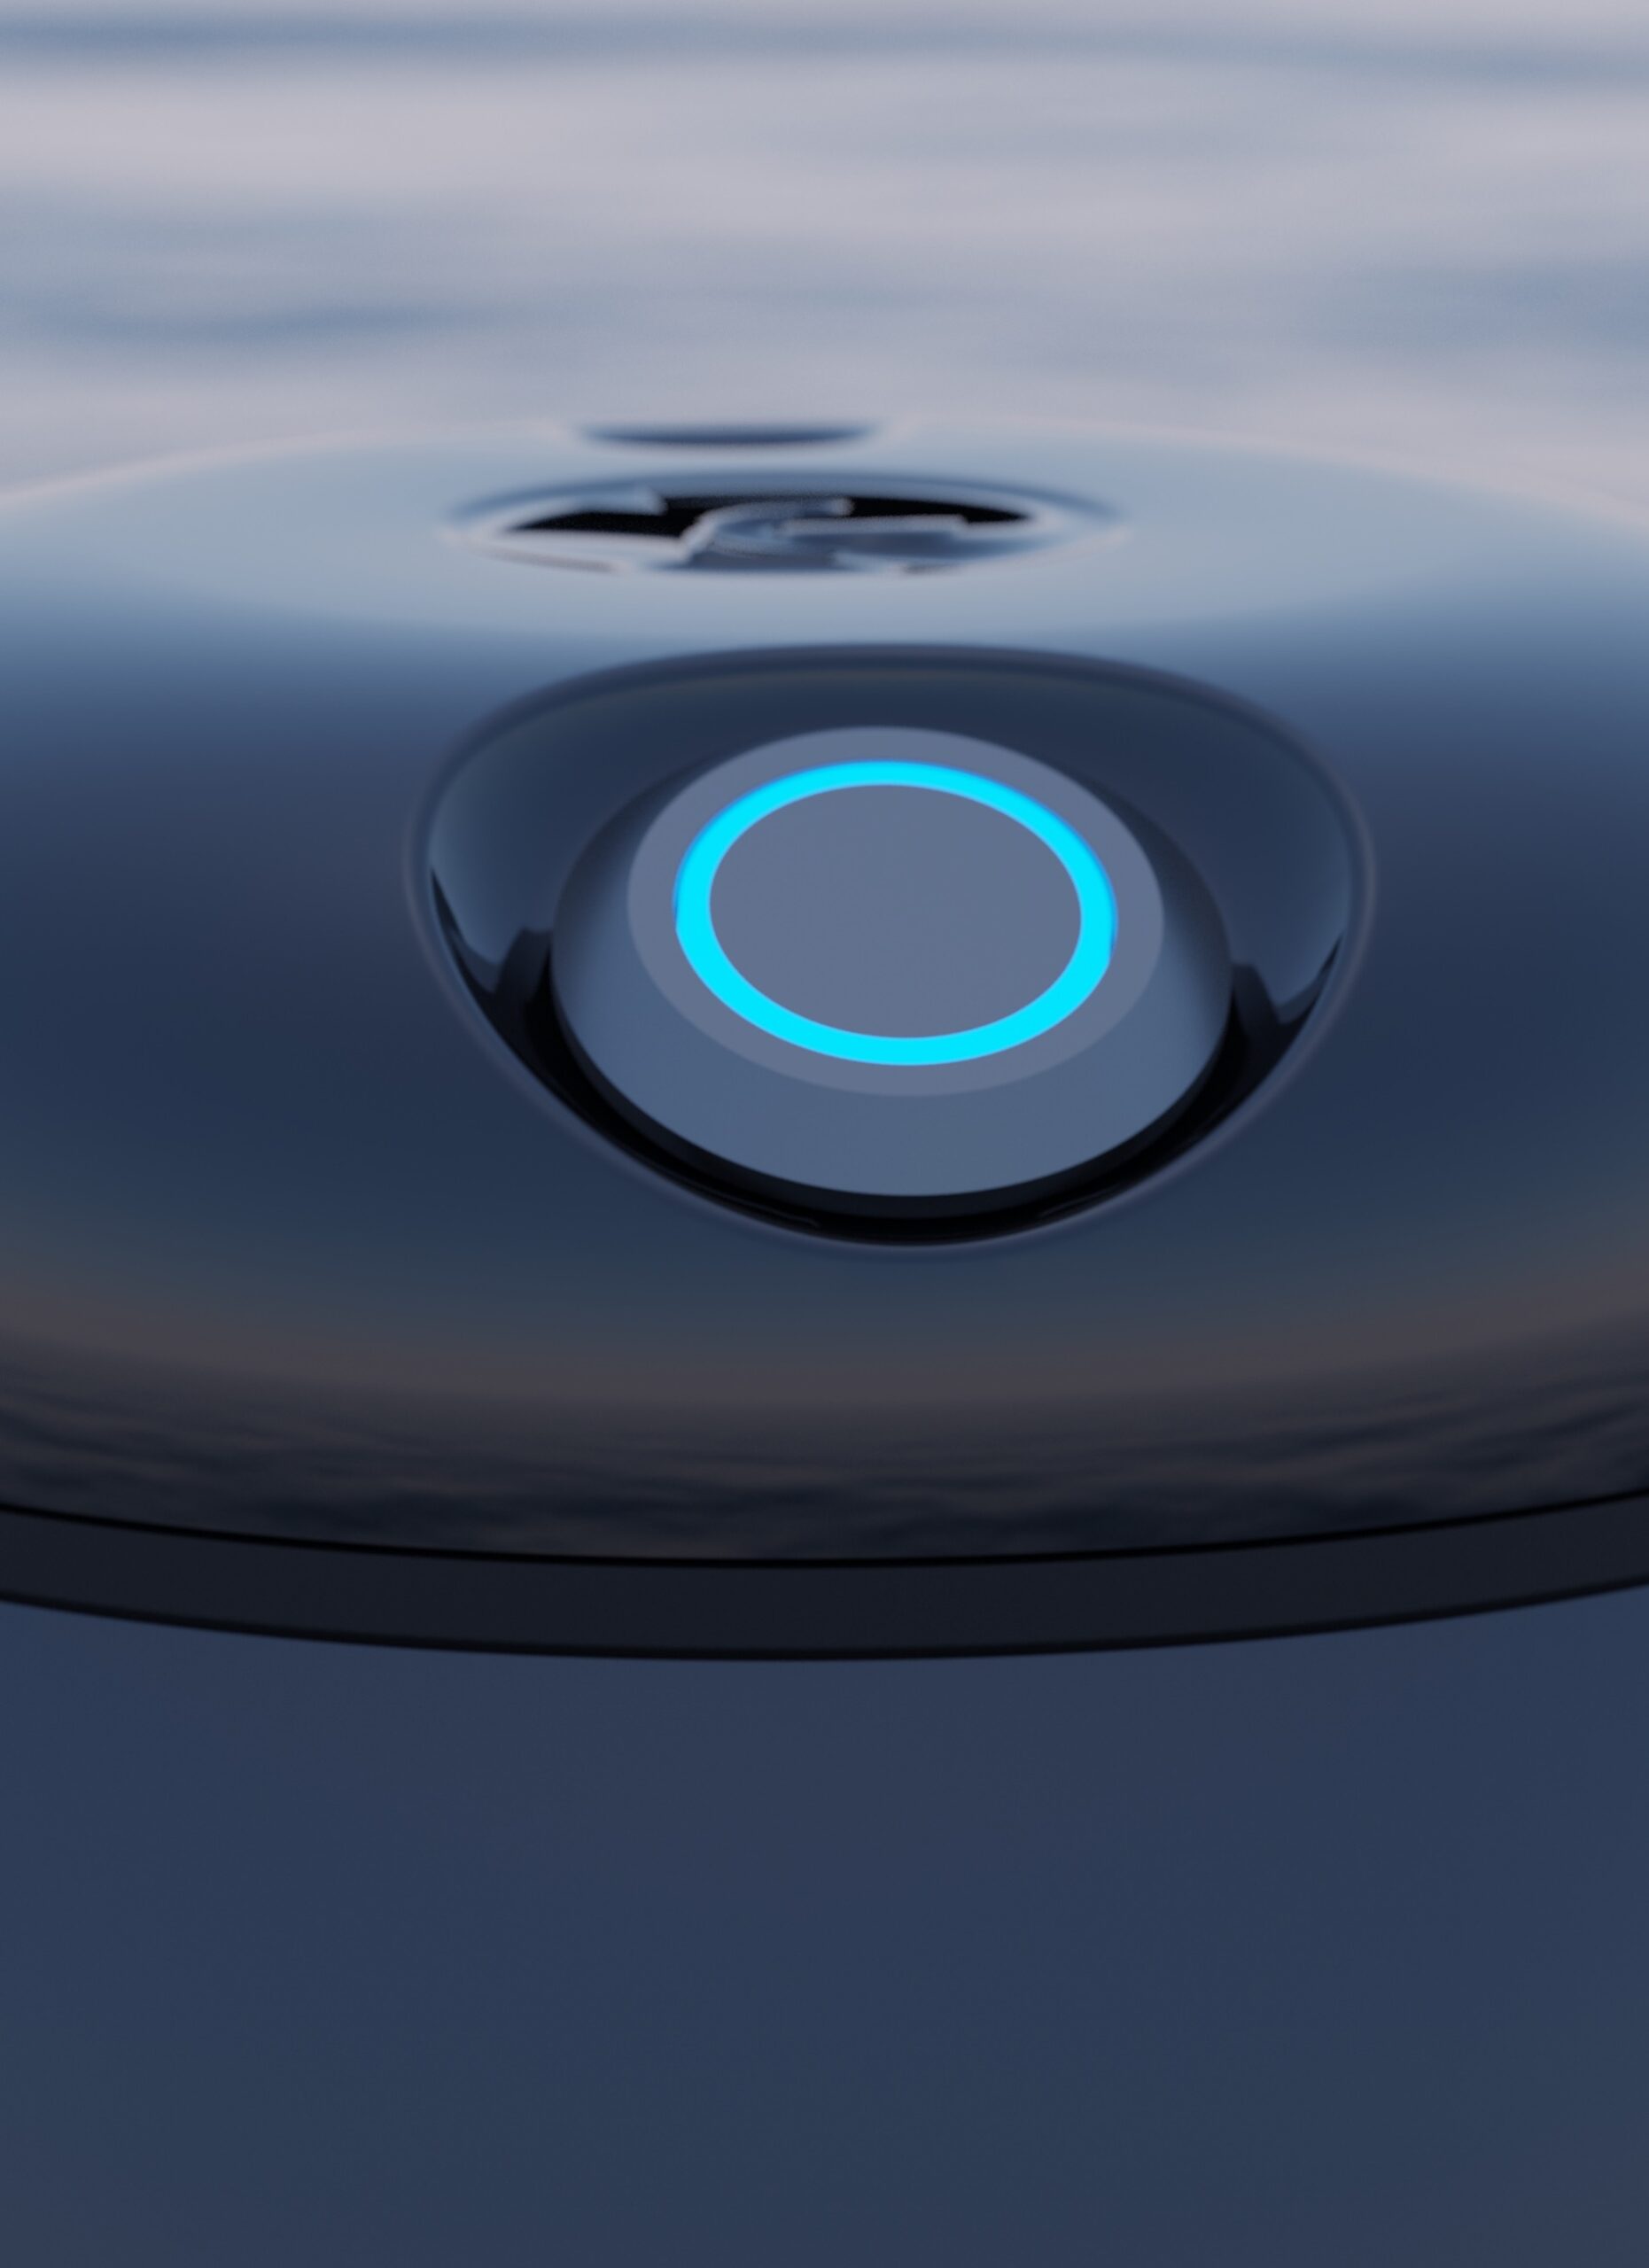 A close up of the smart lid's power button. The lid is screwed on top of a 30oz tumbler stainless steel cup. A blue LED ring shines on the power button.